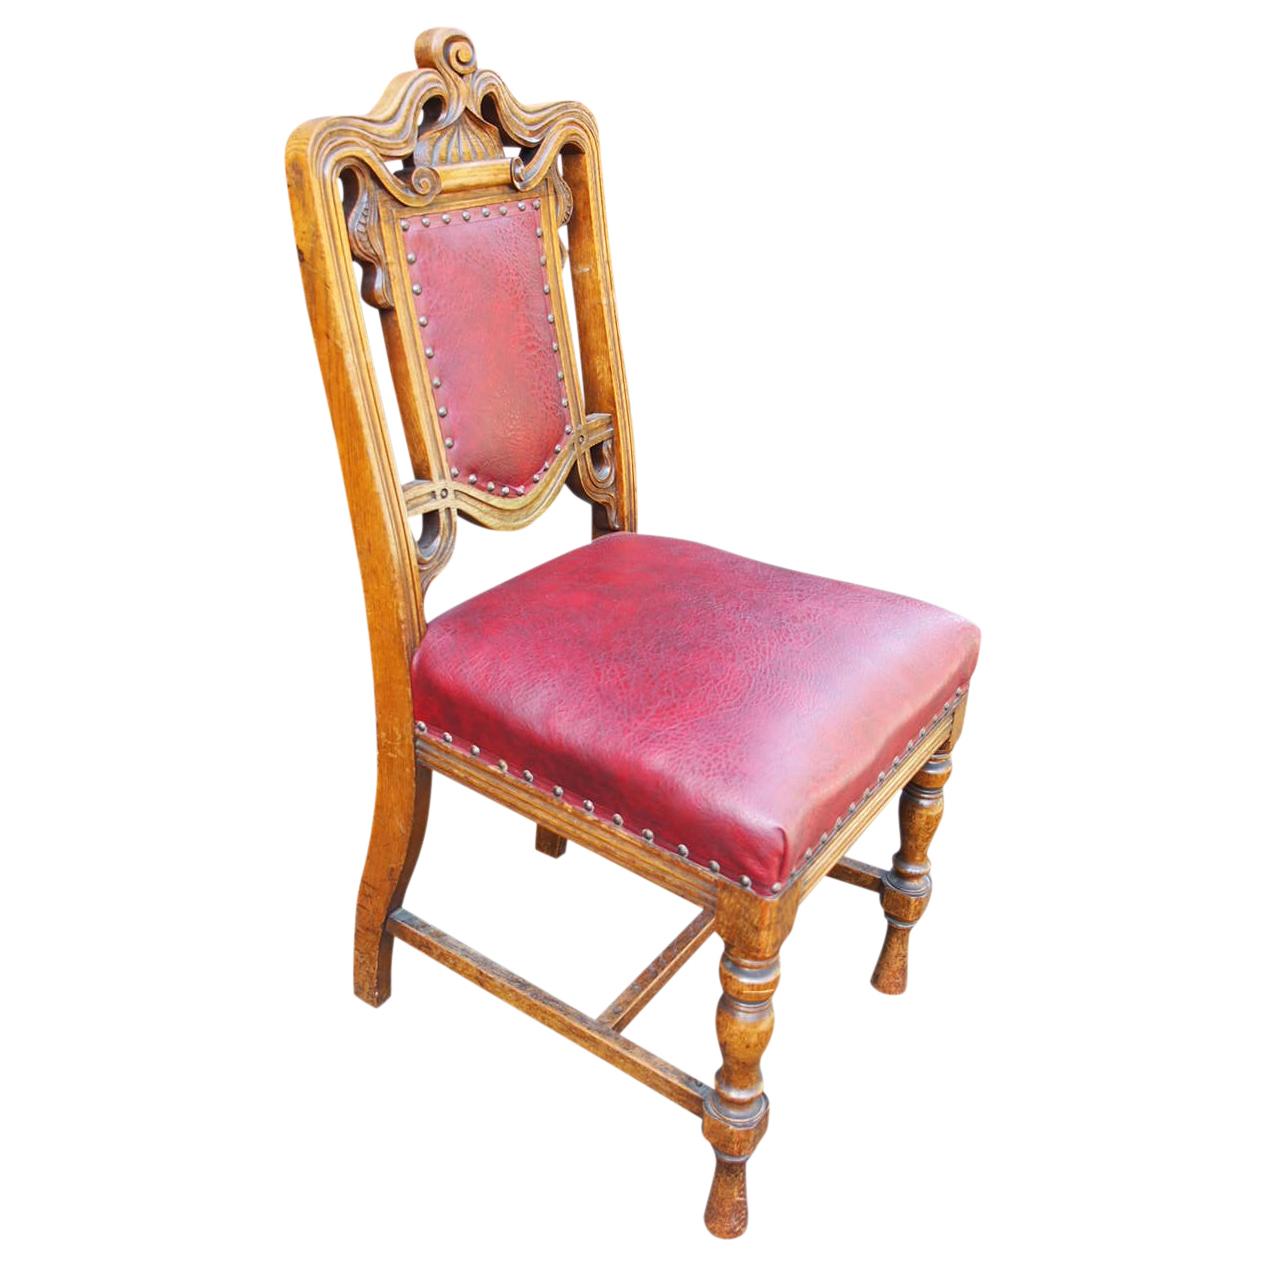 Circa 1880, set of 24 carved oak dining chairs, with 23 side chairs and 1 large armchair. They have a carved top rail and a padded back in the oak frame with a large stuffover seat. The front and side rails are ribbed and it stands on turned and